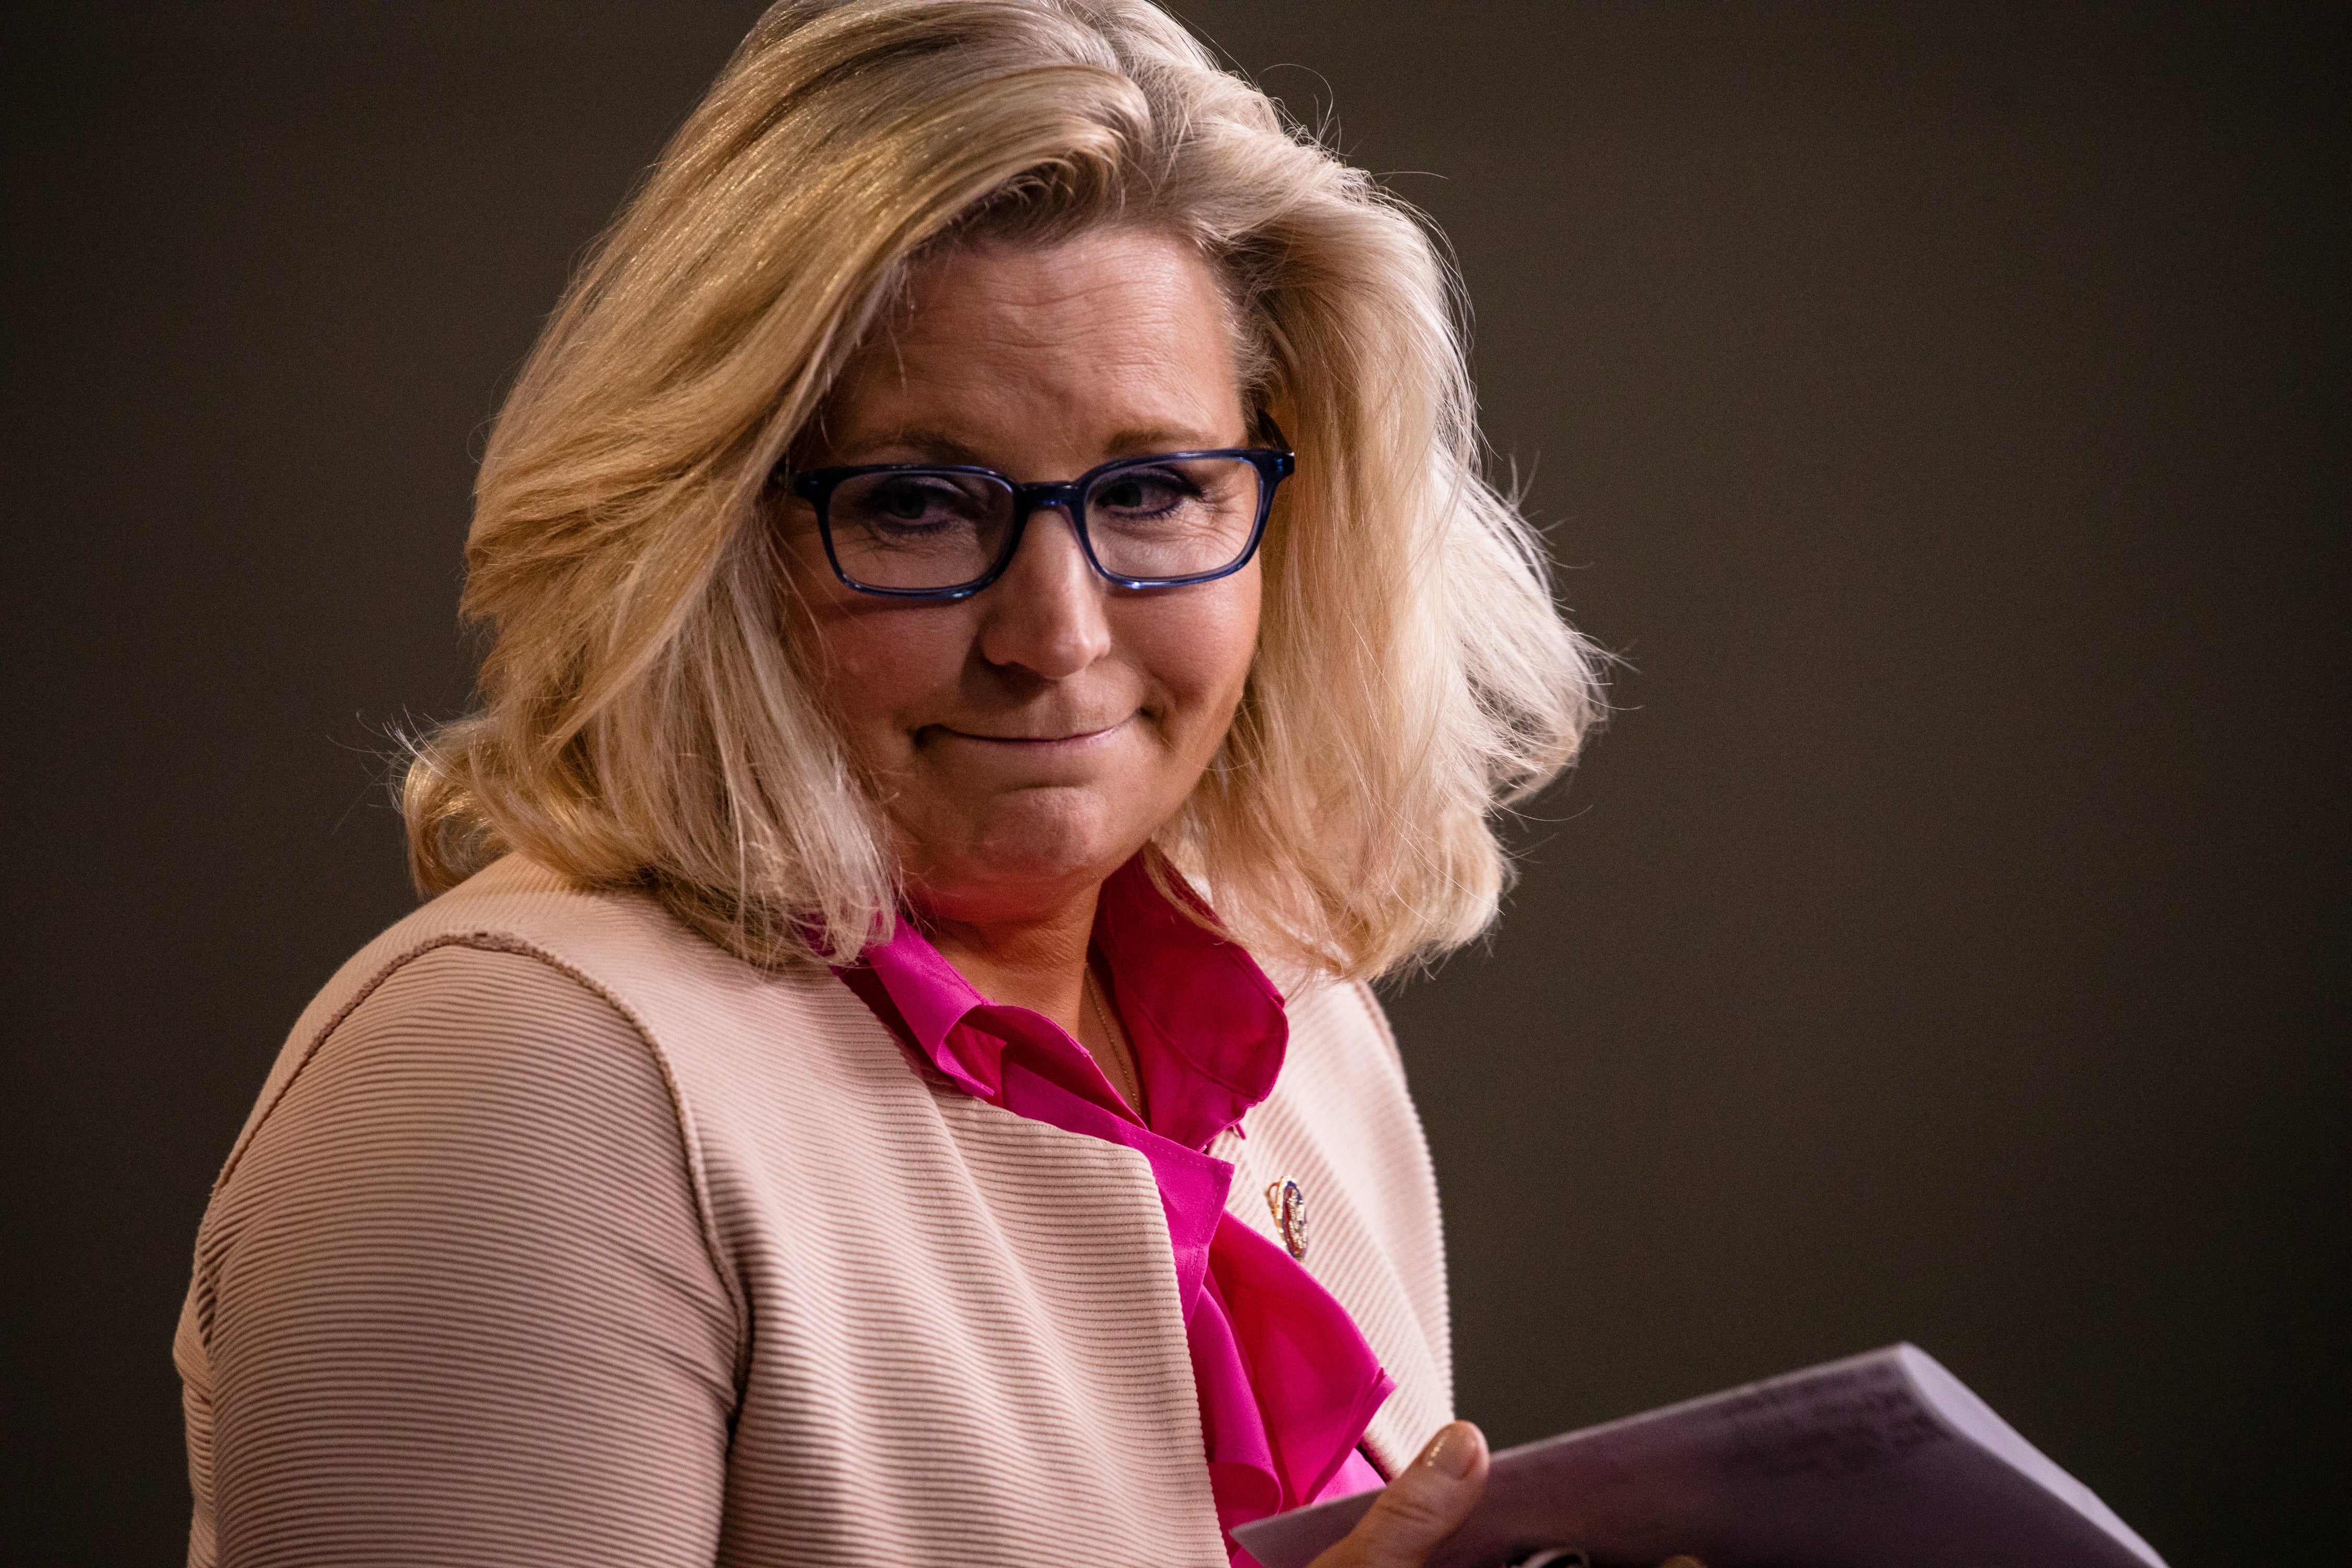 Why is Liz Cheney fighting for her political life? The Independent pic